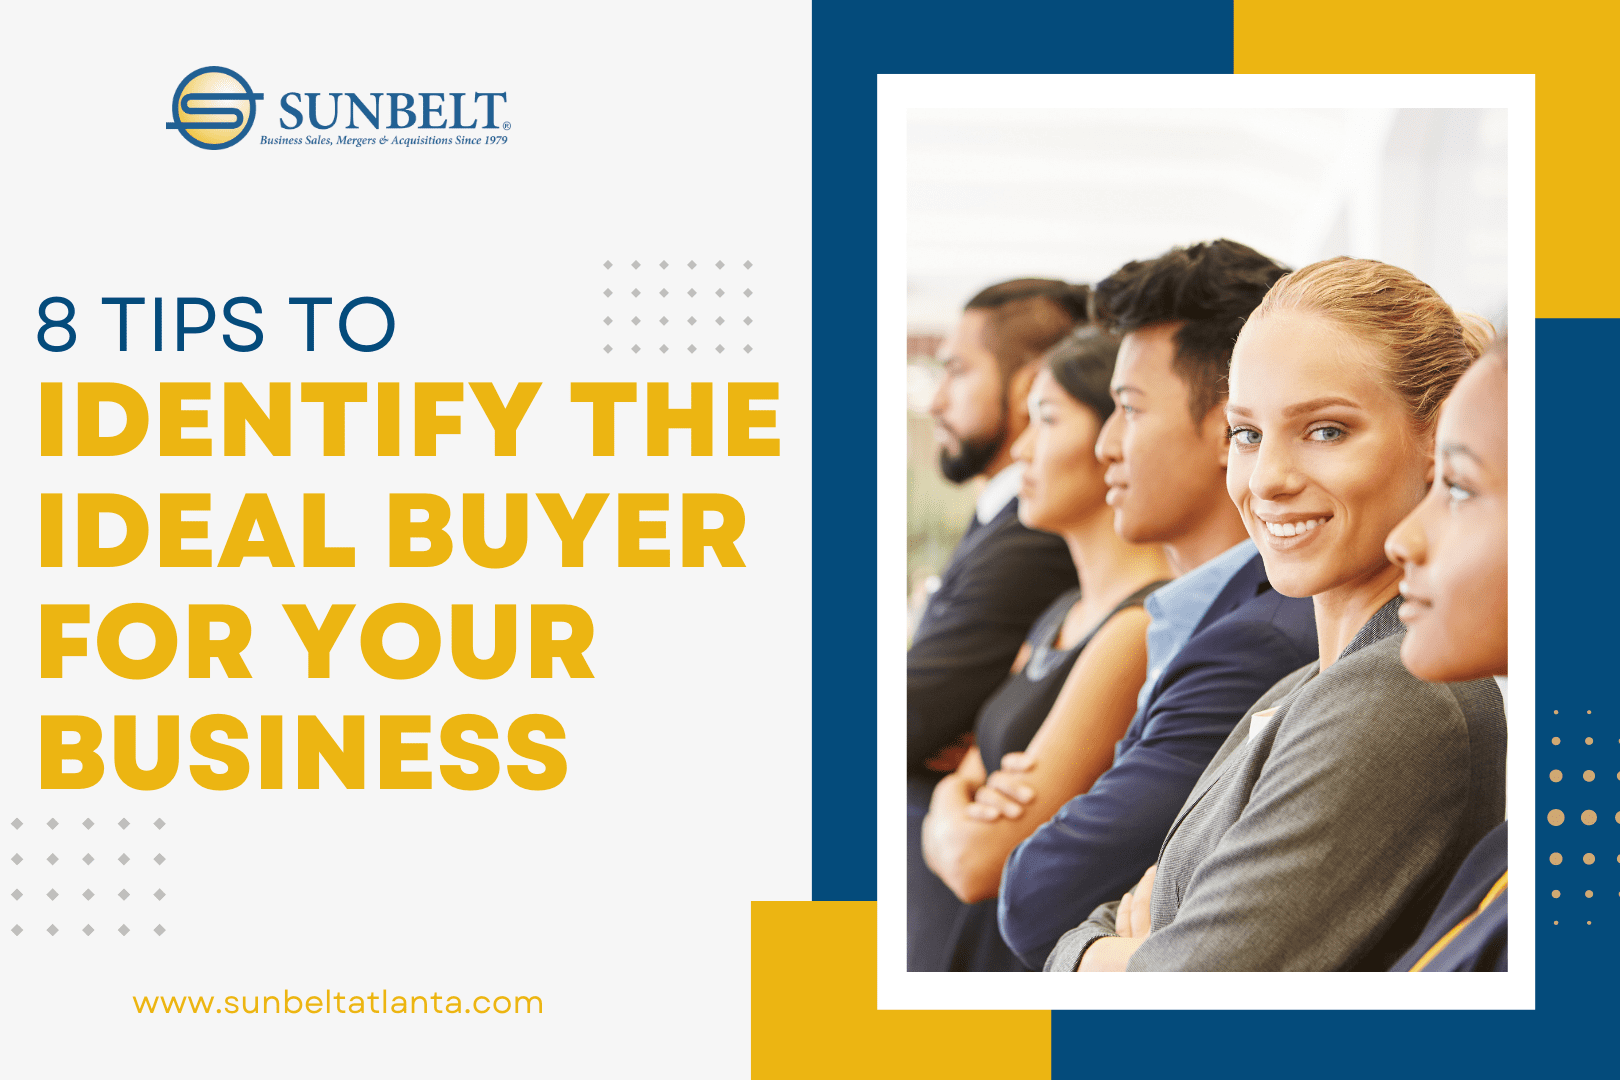 8 Tips to Find the Best Buyer for Your Business